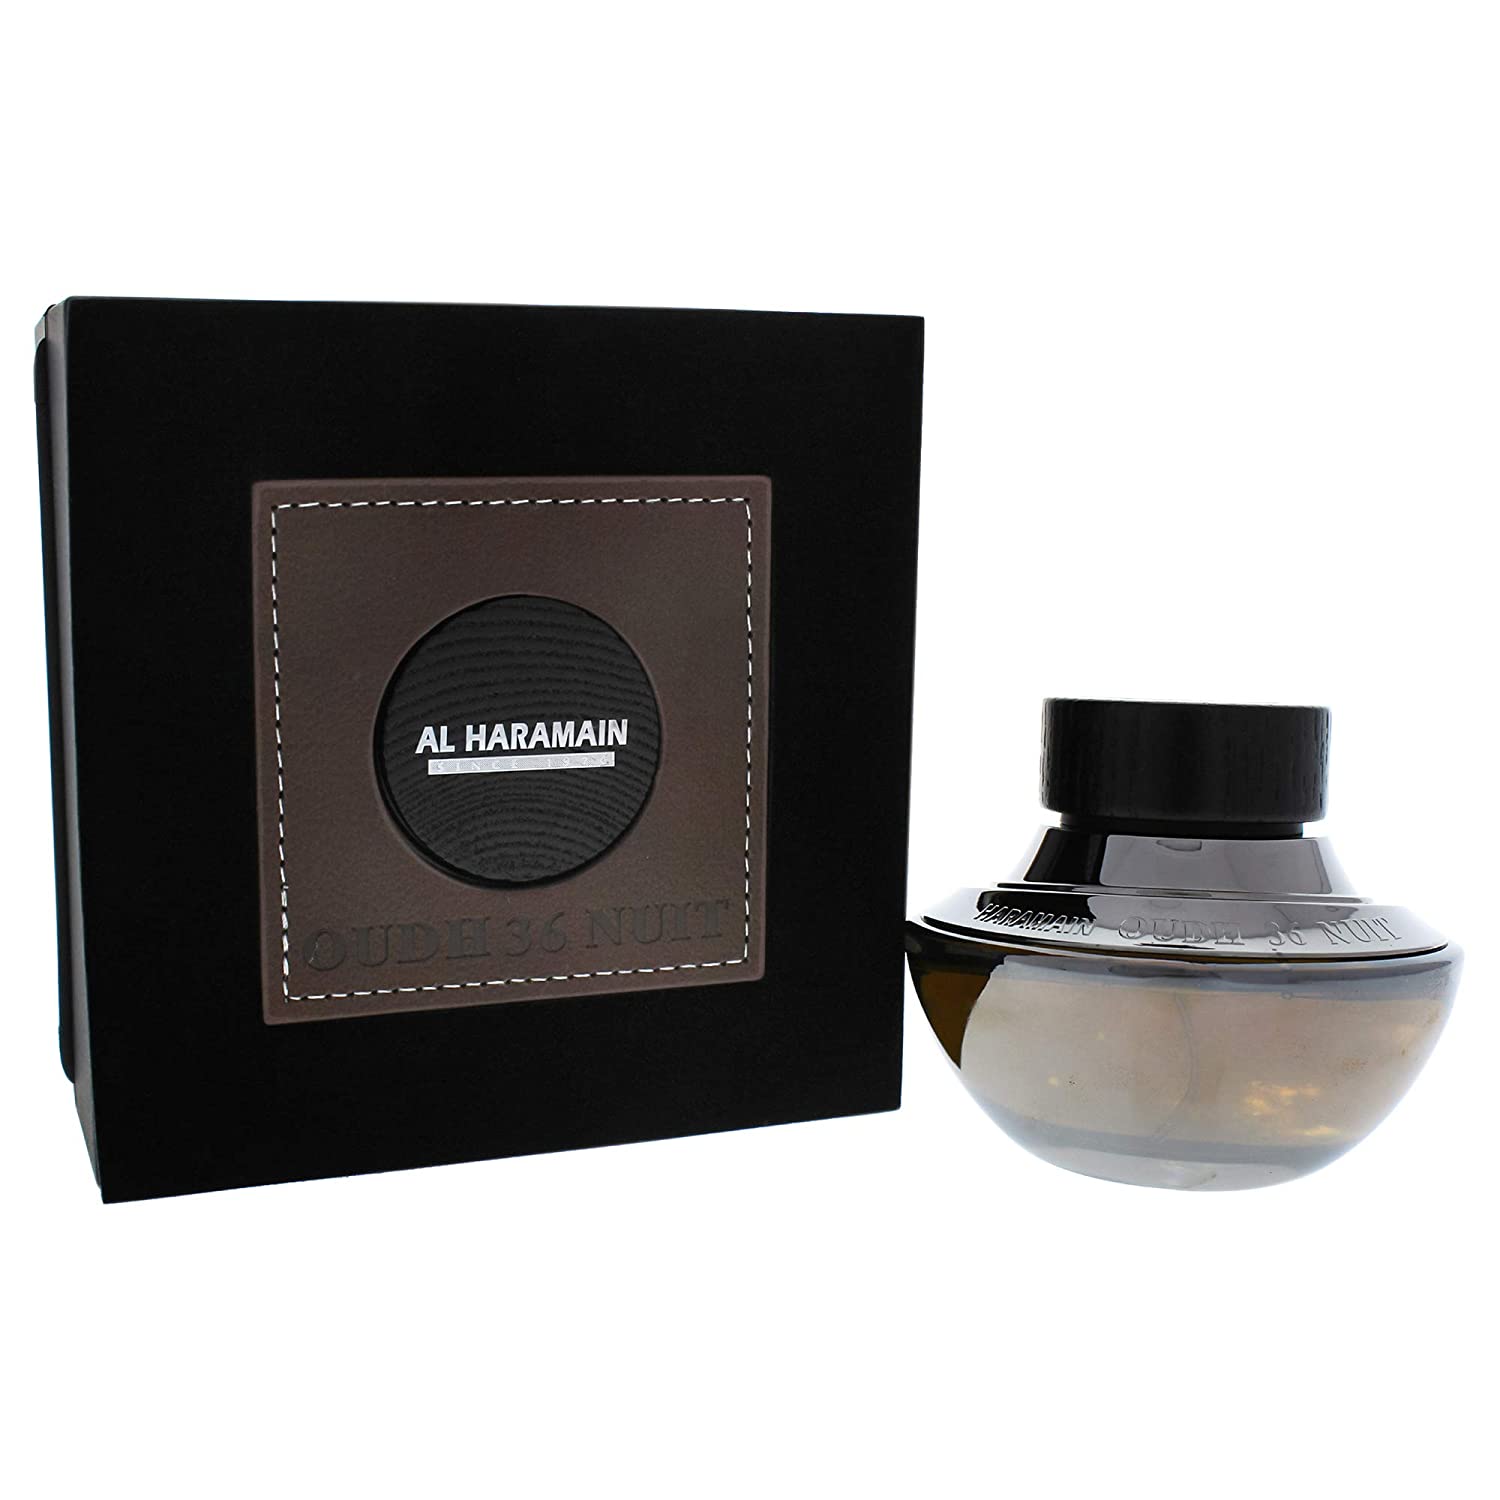 Oudh 36 Nuit Cologne by Al Haramain, In 2016, Oudh 36 Nuit debuted to consumer delight and critical acclaim. This Arabian-inspired fragrance is suitable for both men and women. With top notes of cedarwood, cardamom and geranium, the cologne offers a cozy, spicy aroma. Middle notes of rose, agarwood and saffron perfectly balance the woody, earthy tones found in this cologne. Meanwhile, foundational notes of musk, sandalwood and labdanum offer a strength without overpowering the delicate, warm nature of this fragrance. For both everyday wear and first impressions this warm cologne is a must-have.